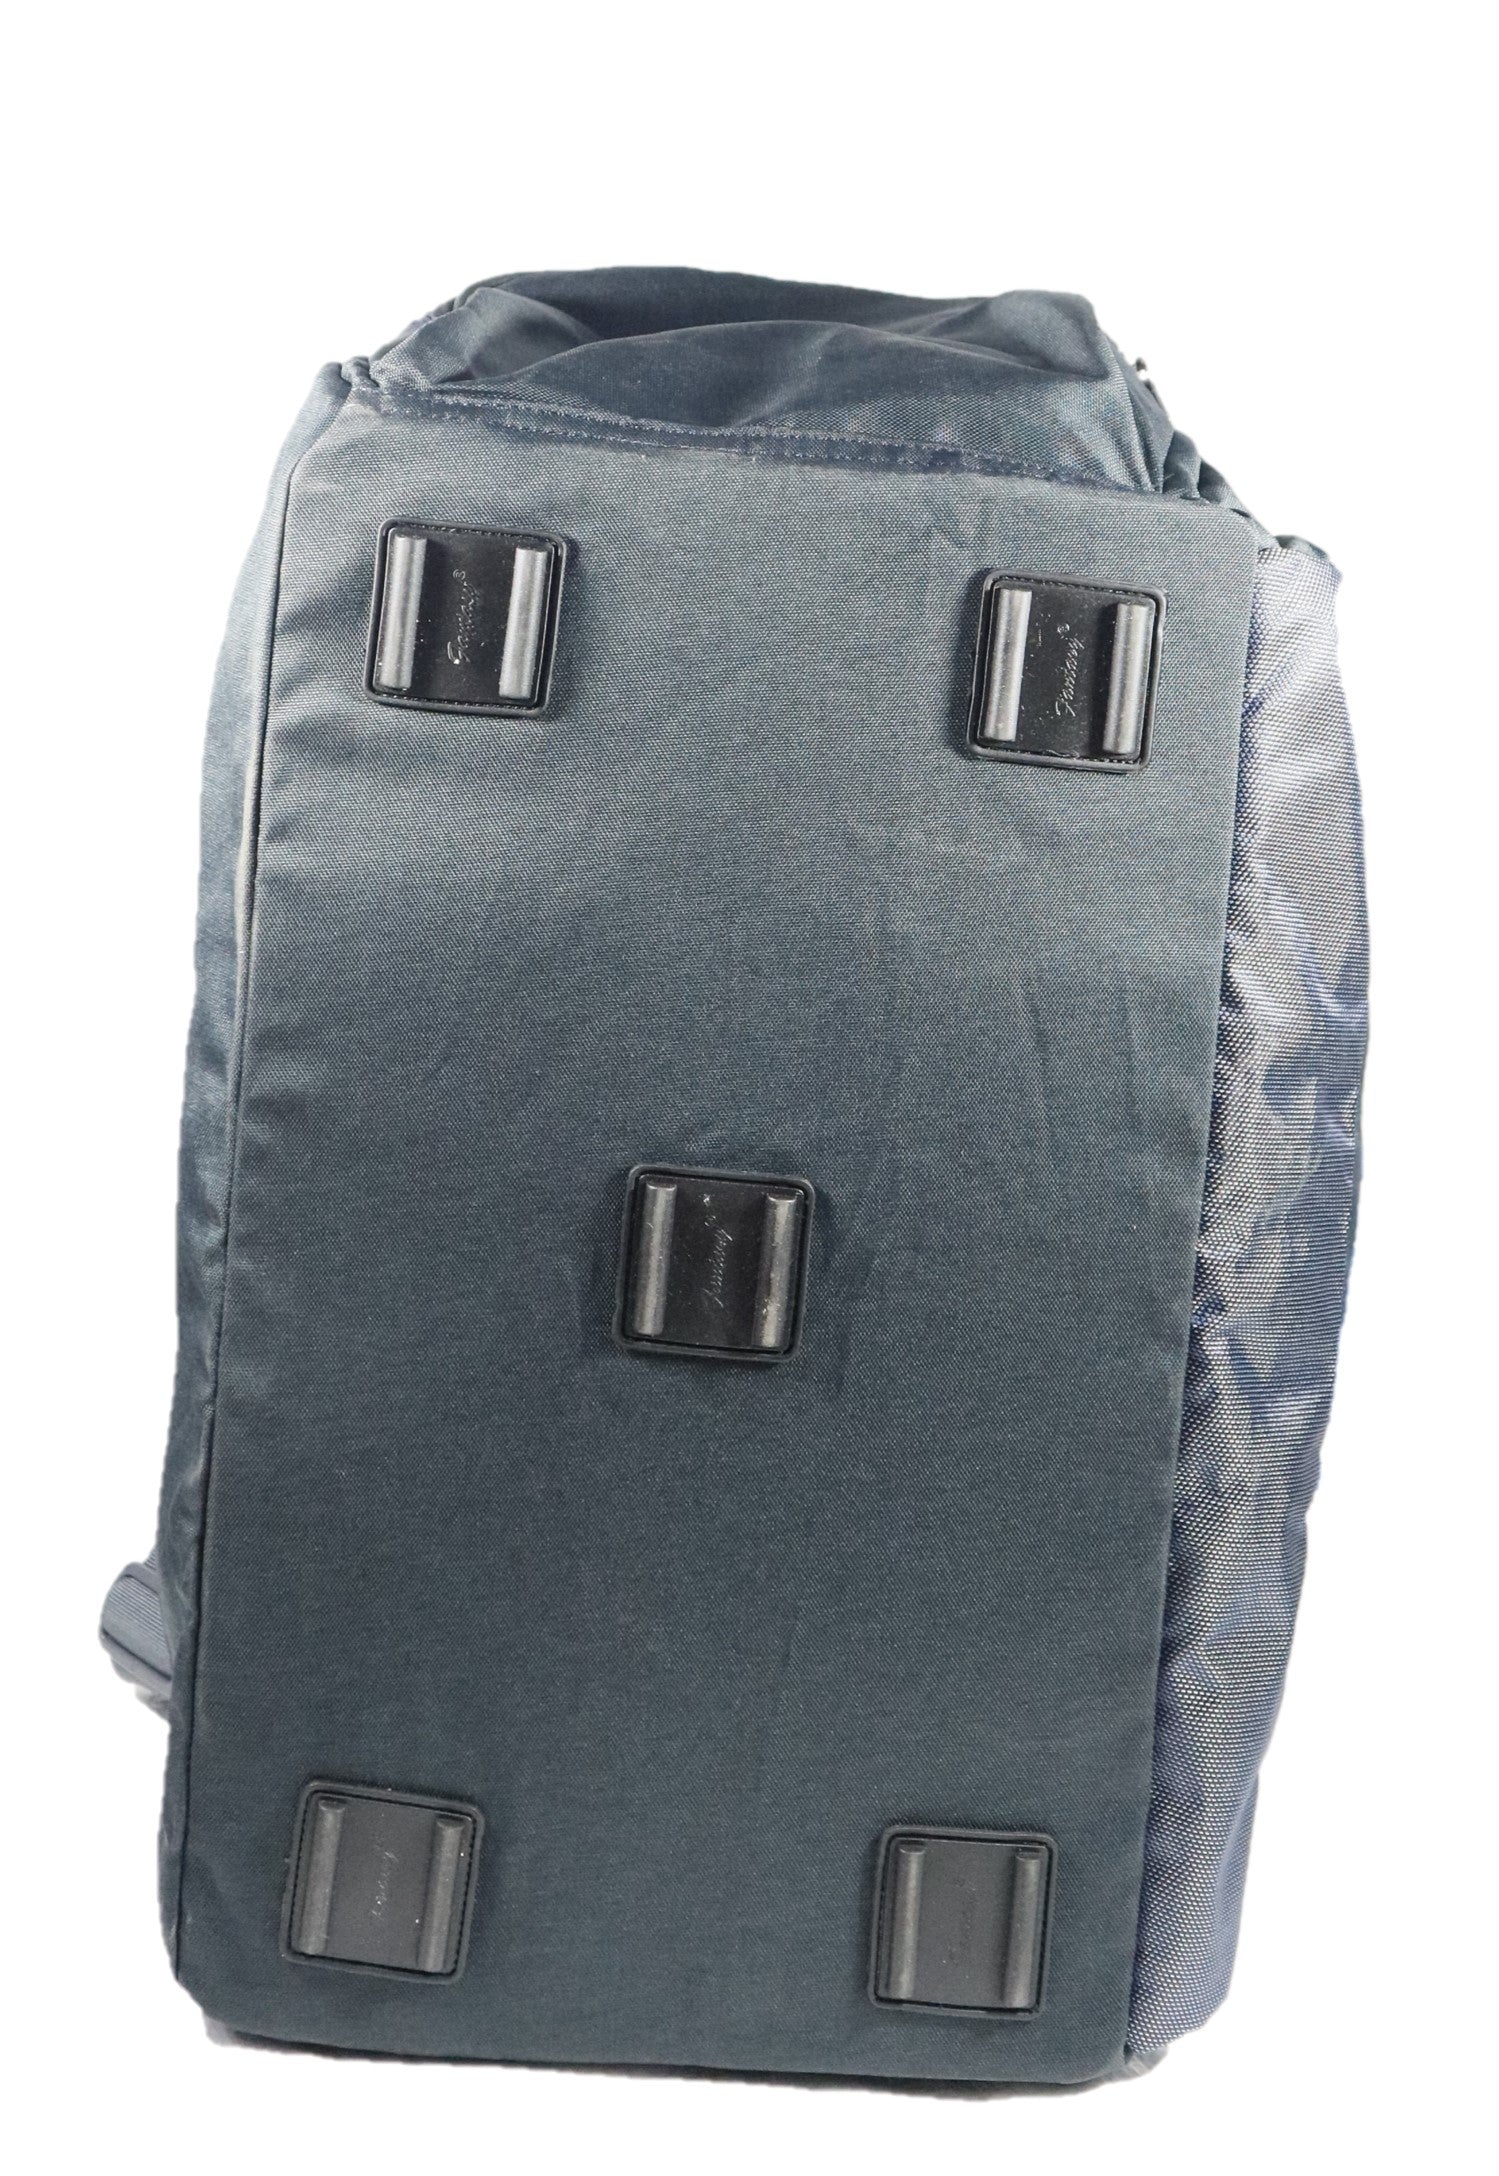 Luggage bag with Smart spacious construction